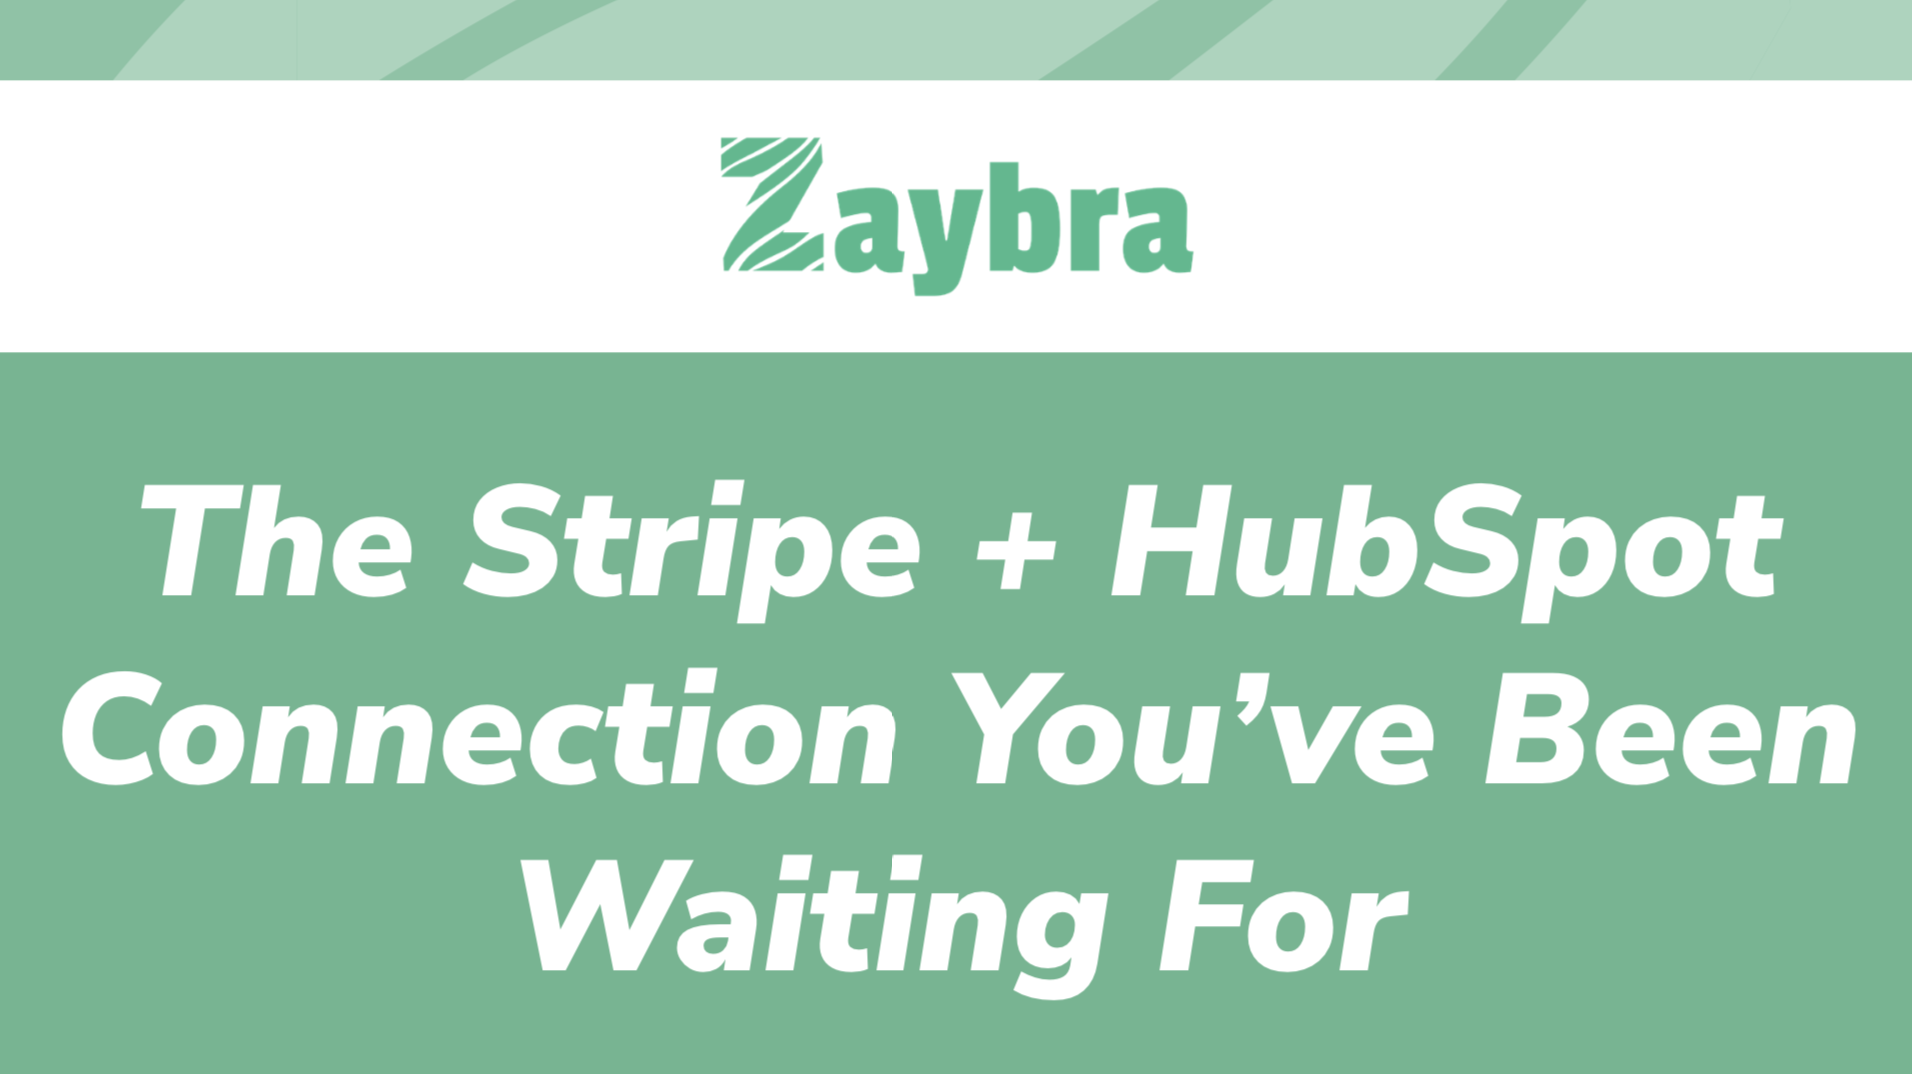 Zaybra: The Stripe + HubSpot Connection You've Been Waiting For